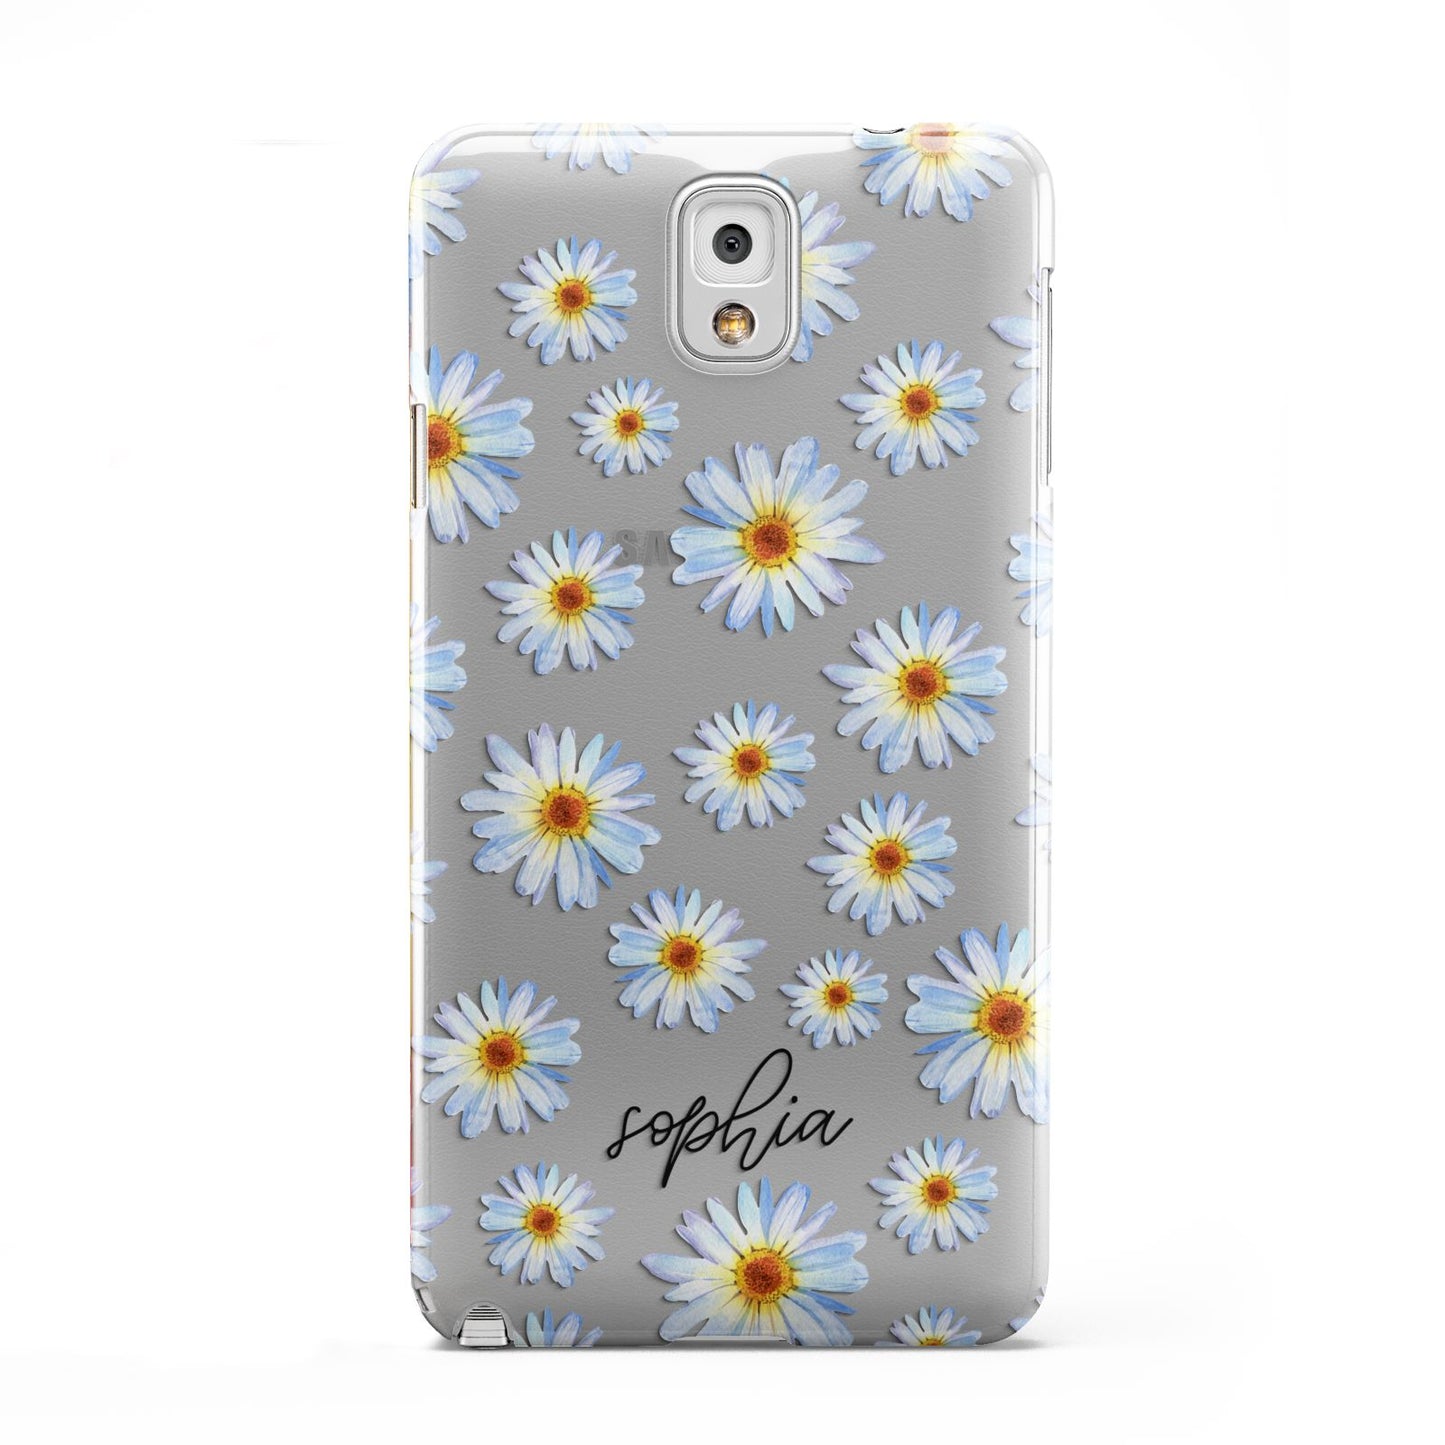 Personalised Daisy Samsung Galaxy Note 3 Case